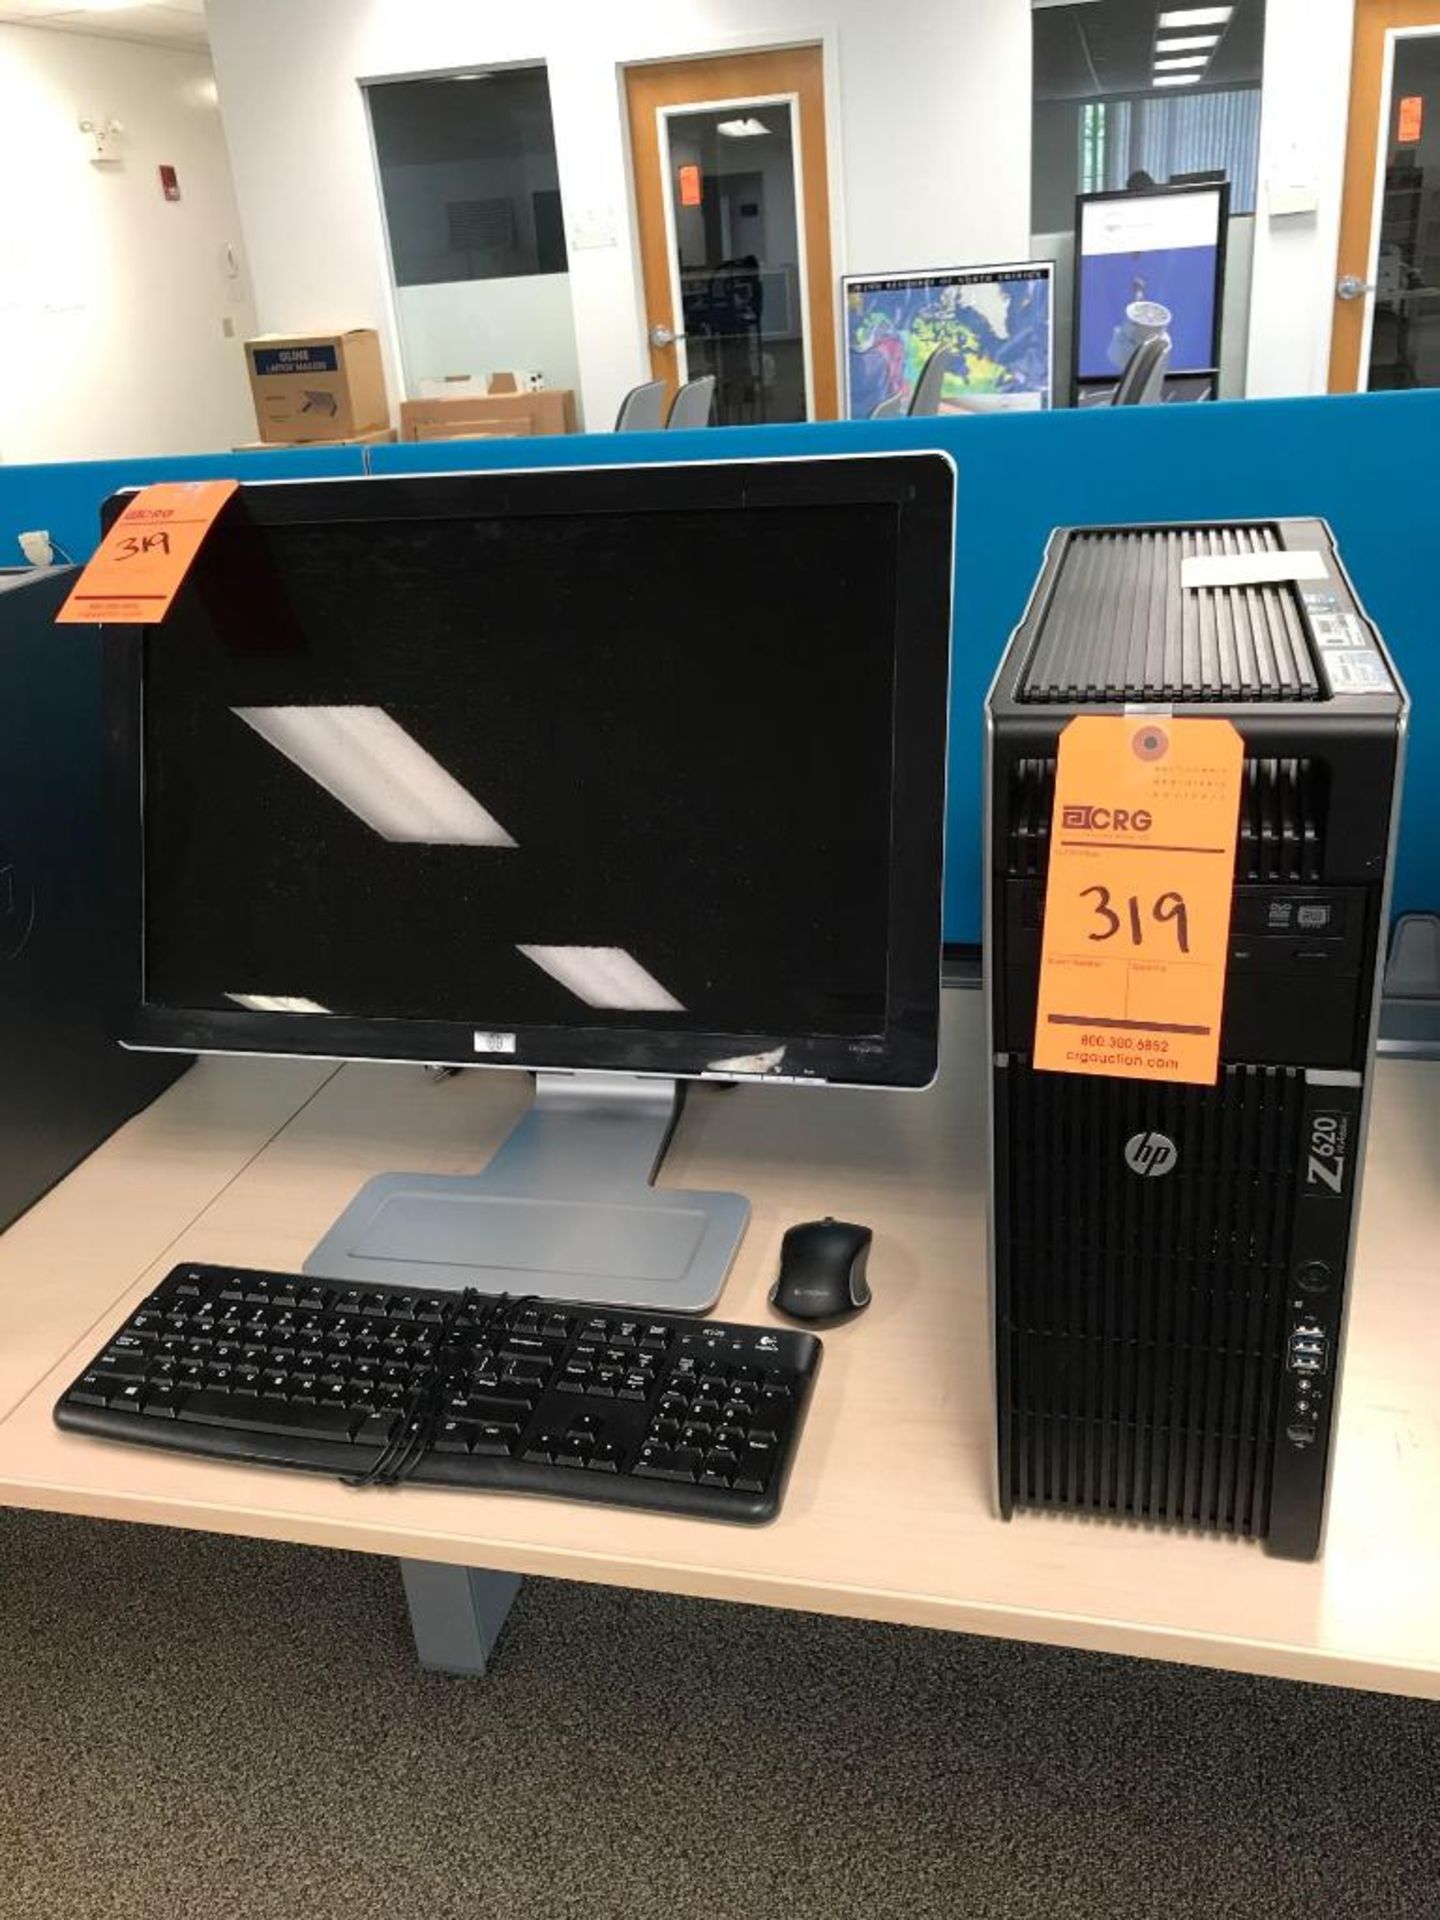 HP Z620 Workstation PC with HP adjustable height monitor, Logitech keyboard and wireless mouse. 500G